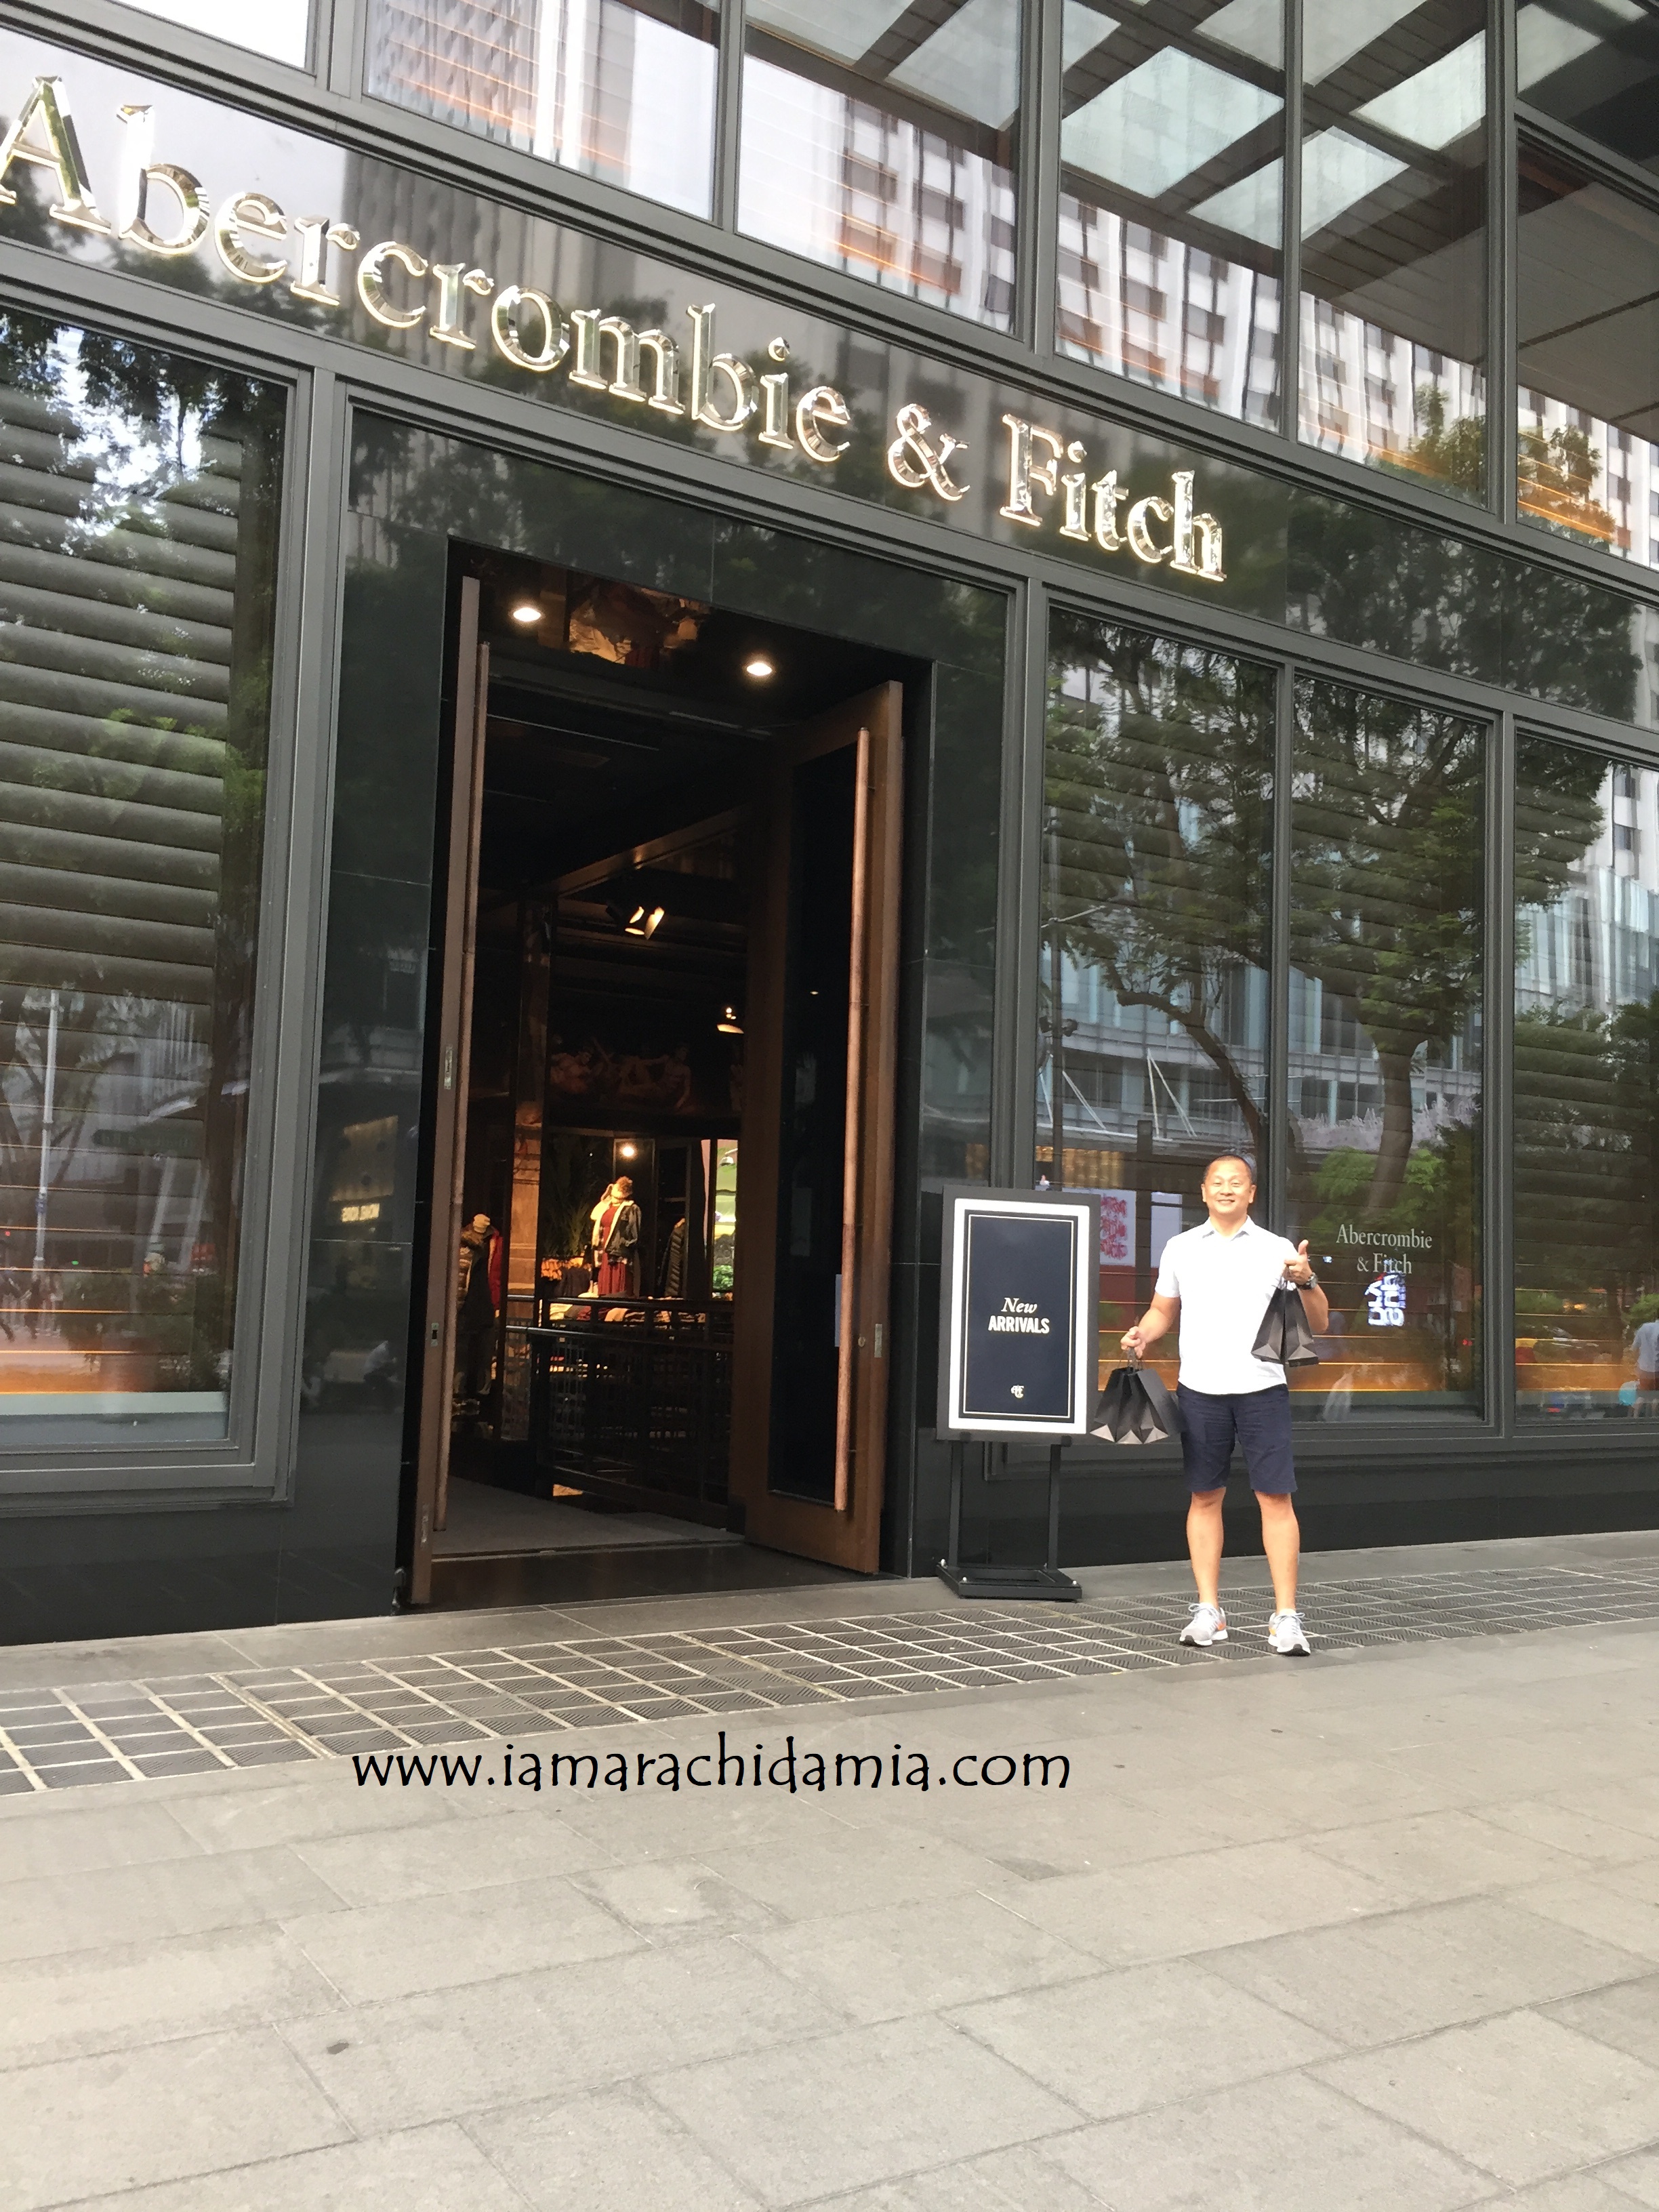 abercrombie and fitch klcc